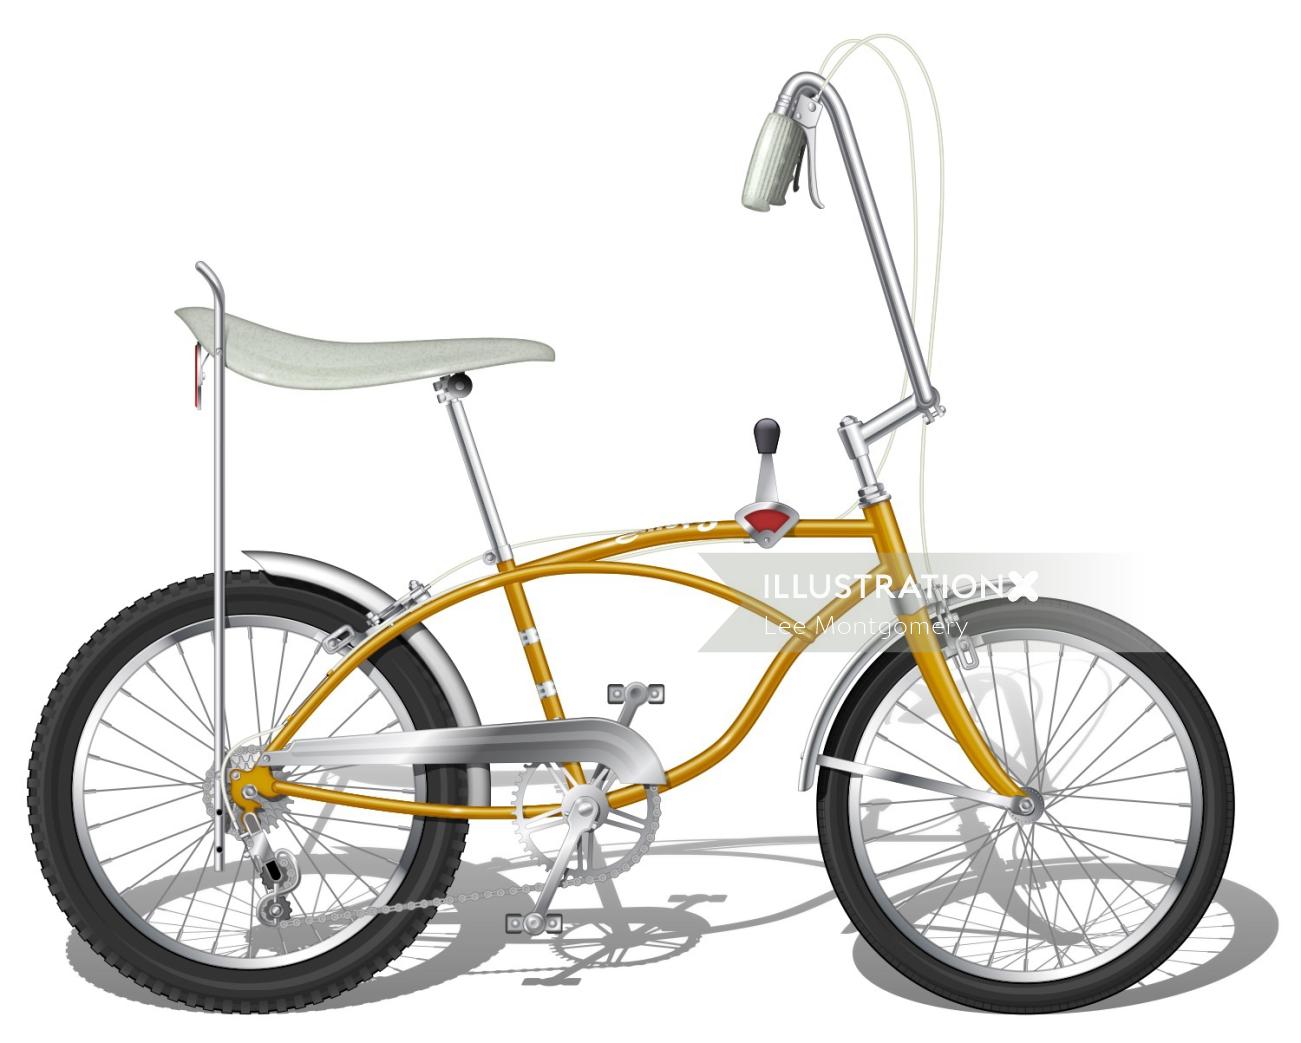 Steyr-Puch自転車のイラスト